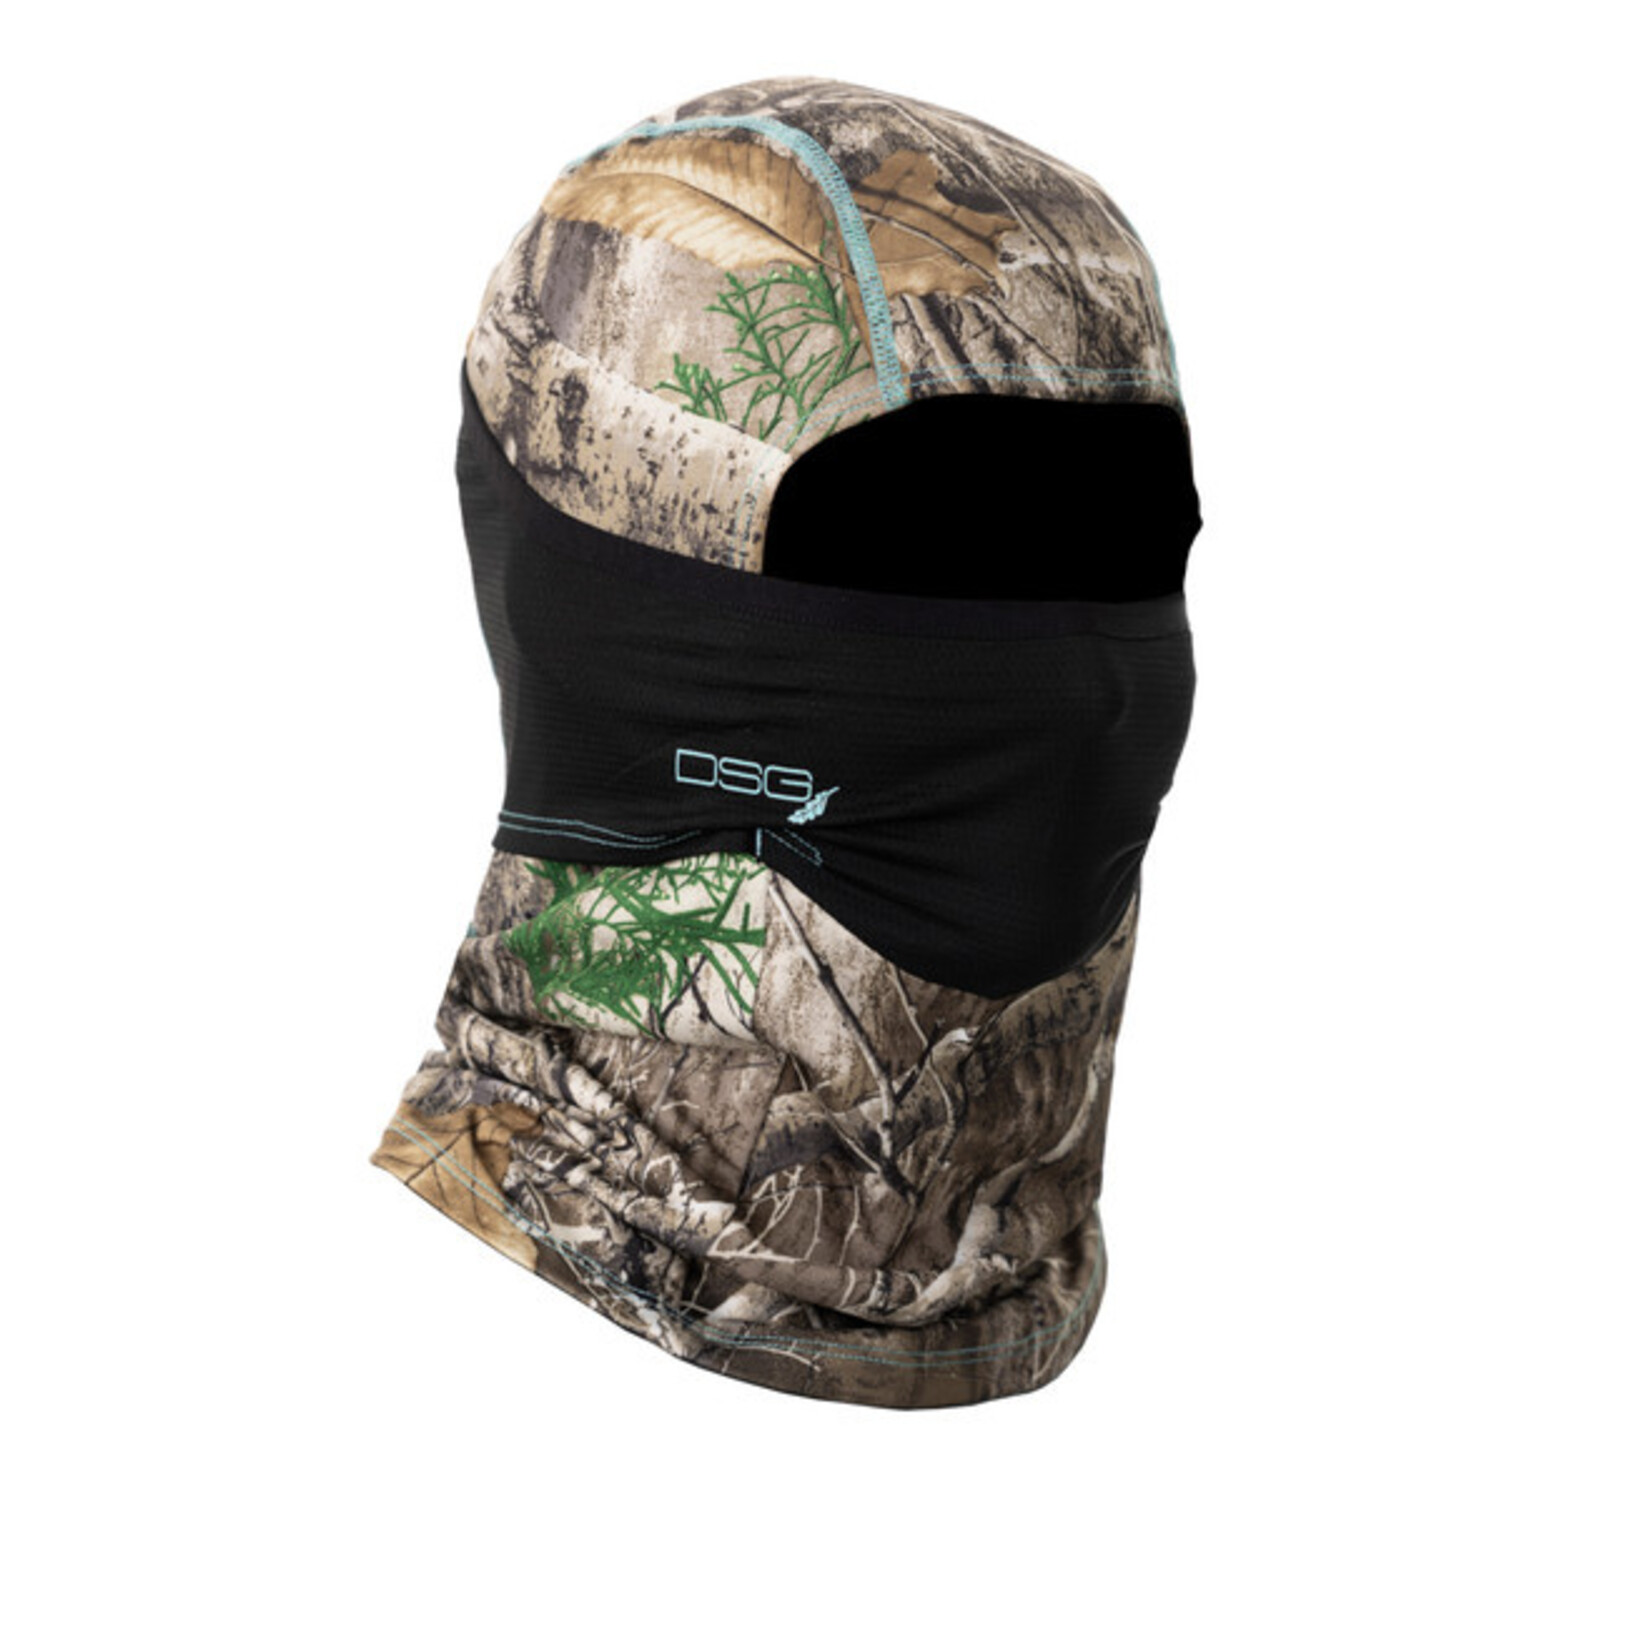 DSG Outerwear DSG Hinged Facemask